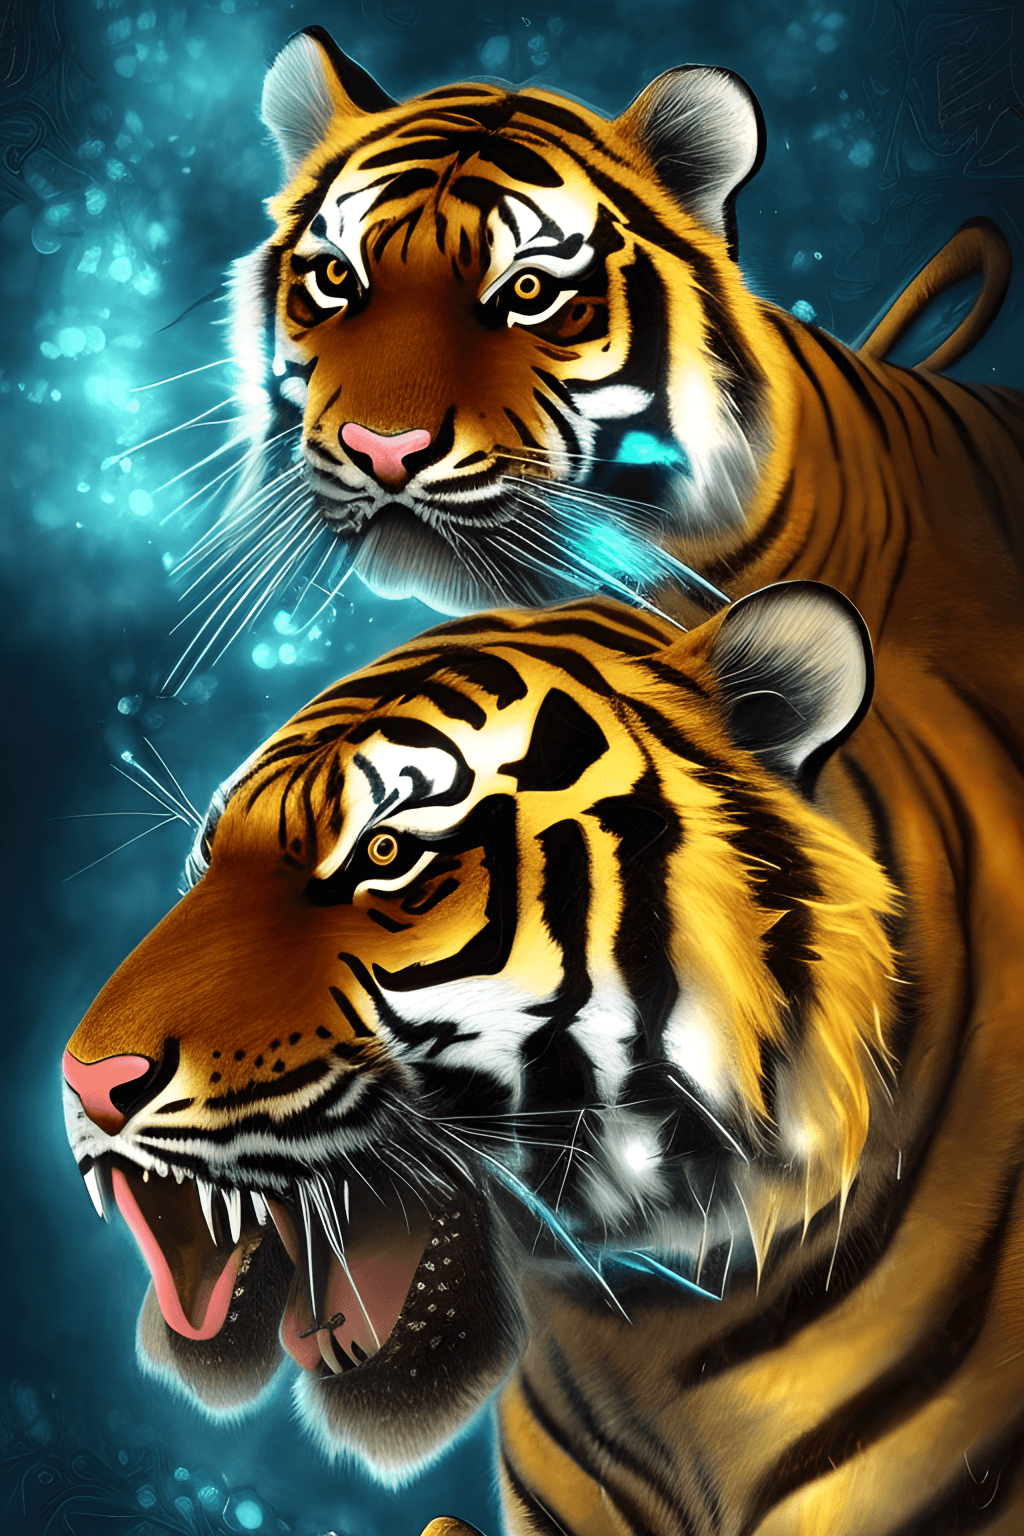 Tiger in the Geometric Steampunk Gothic Digital Painting ...